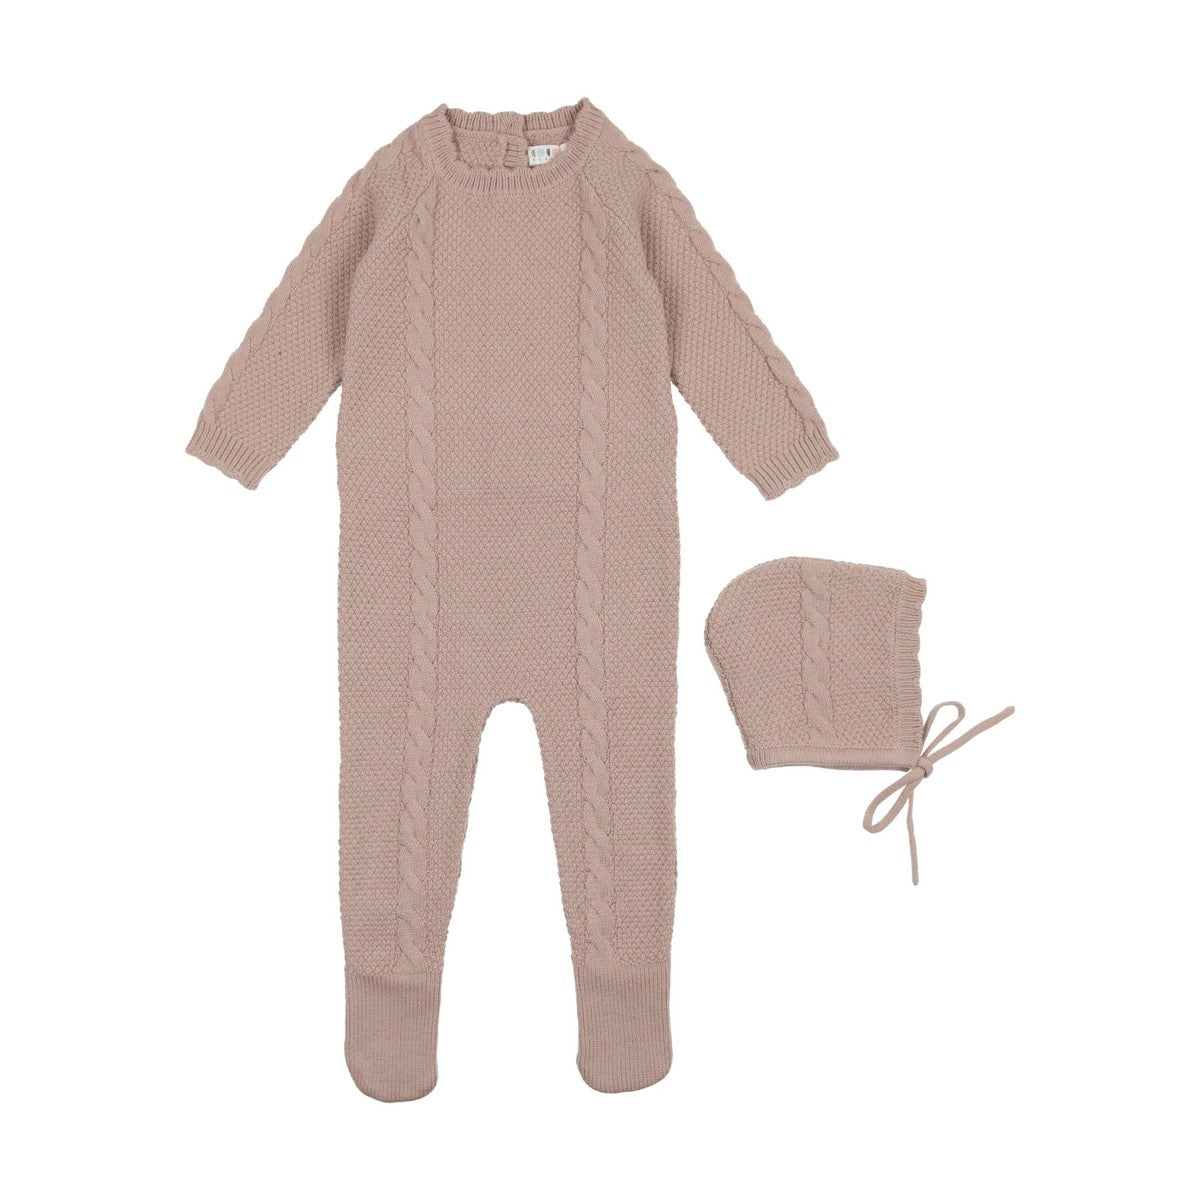 *Coming Soon* Coco Blanc Soft Pink Cabled Knit Footie With Bonnet